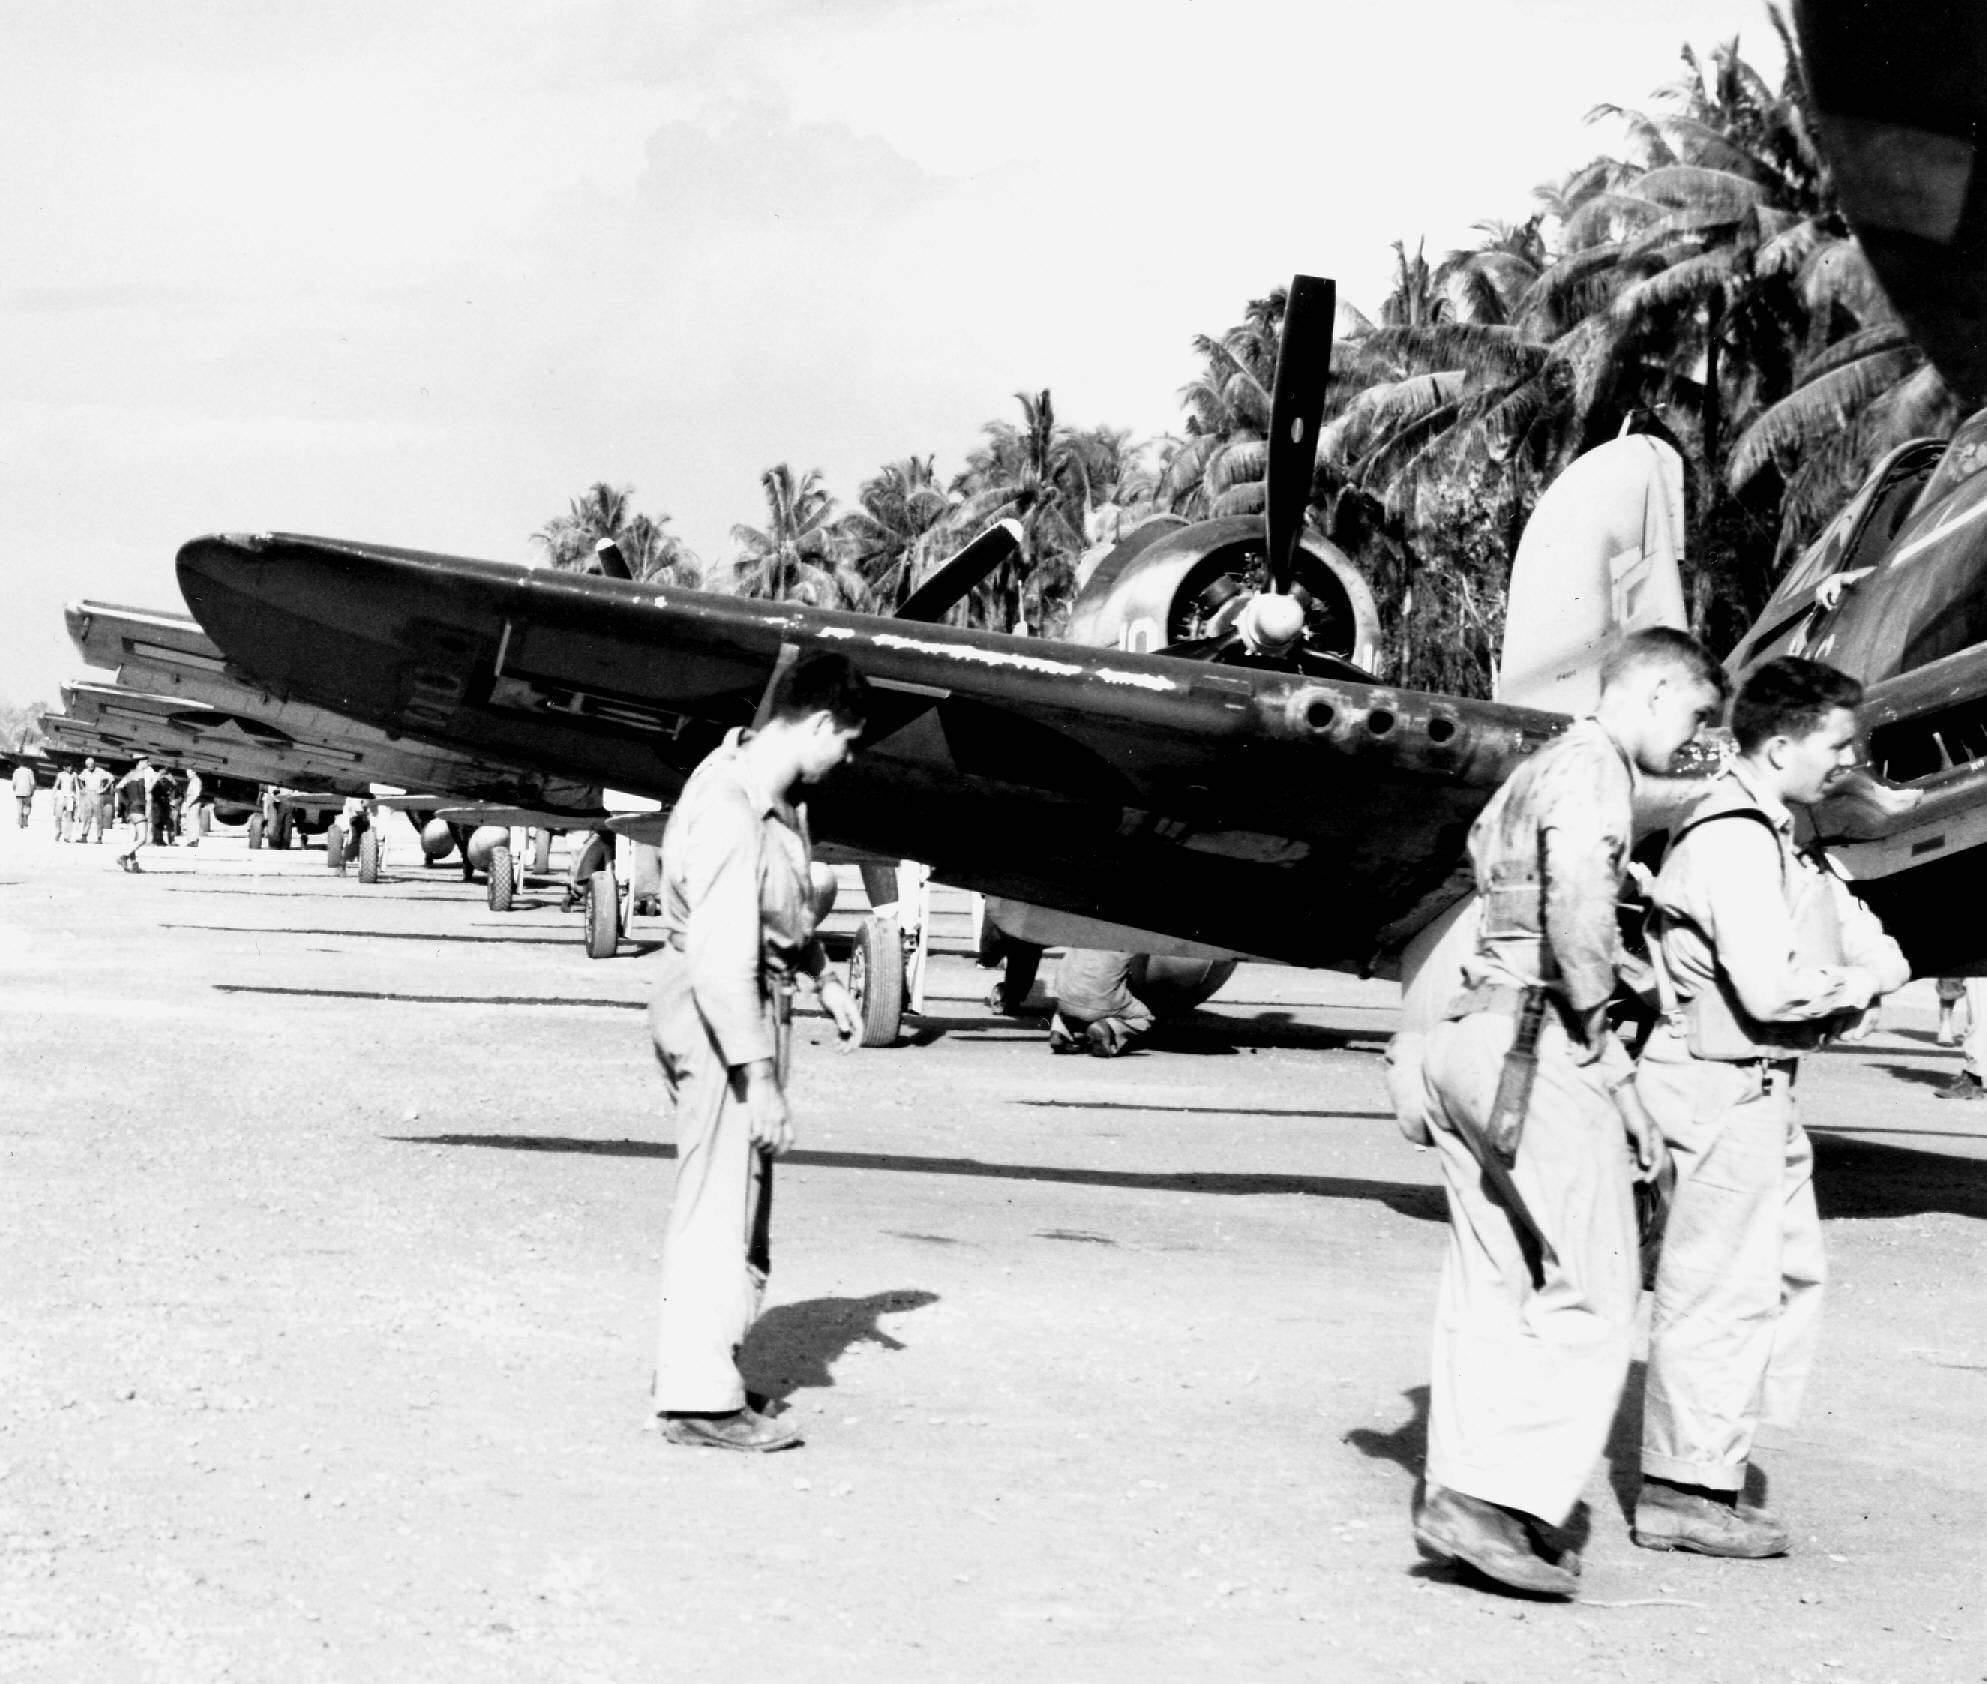 George Ashman Bill Heier & Ed Harper of VMF-214 at Cape Torokina. (Photo by Bruce Gamble Collection)